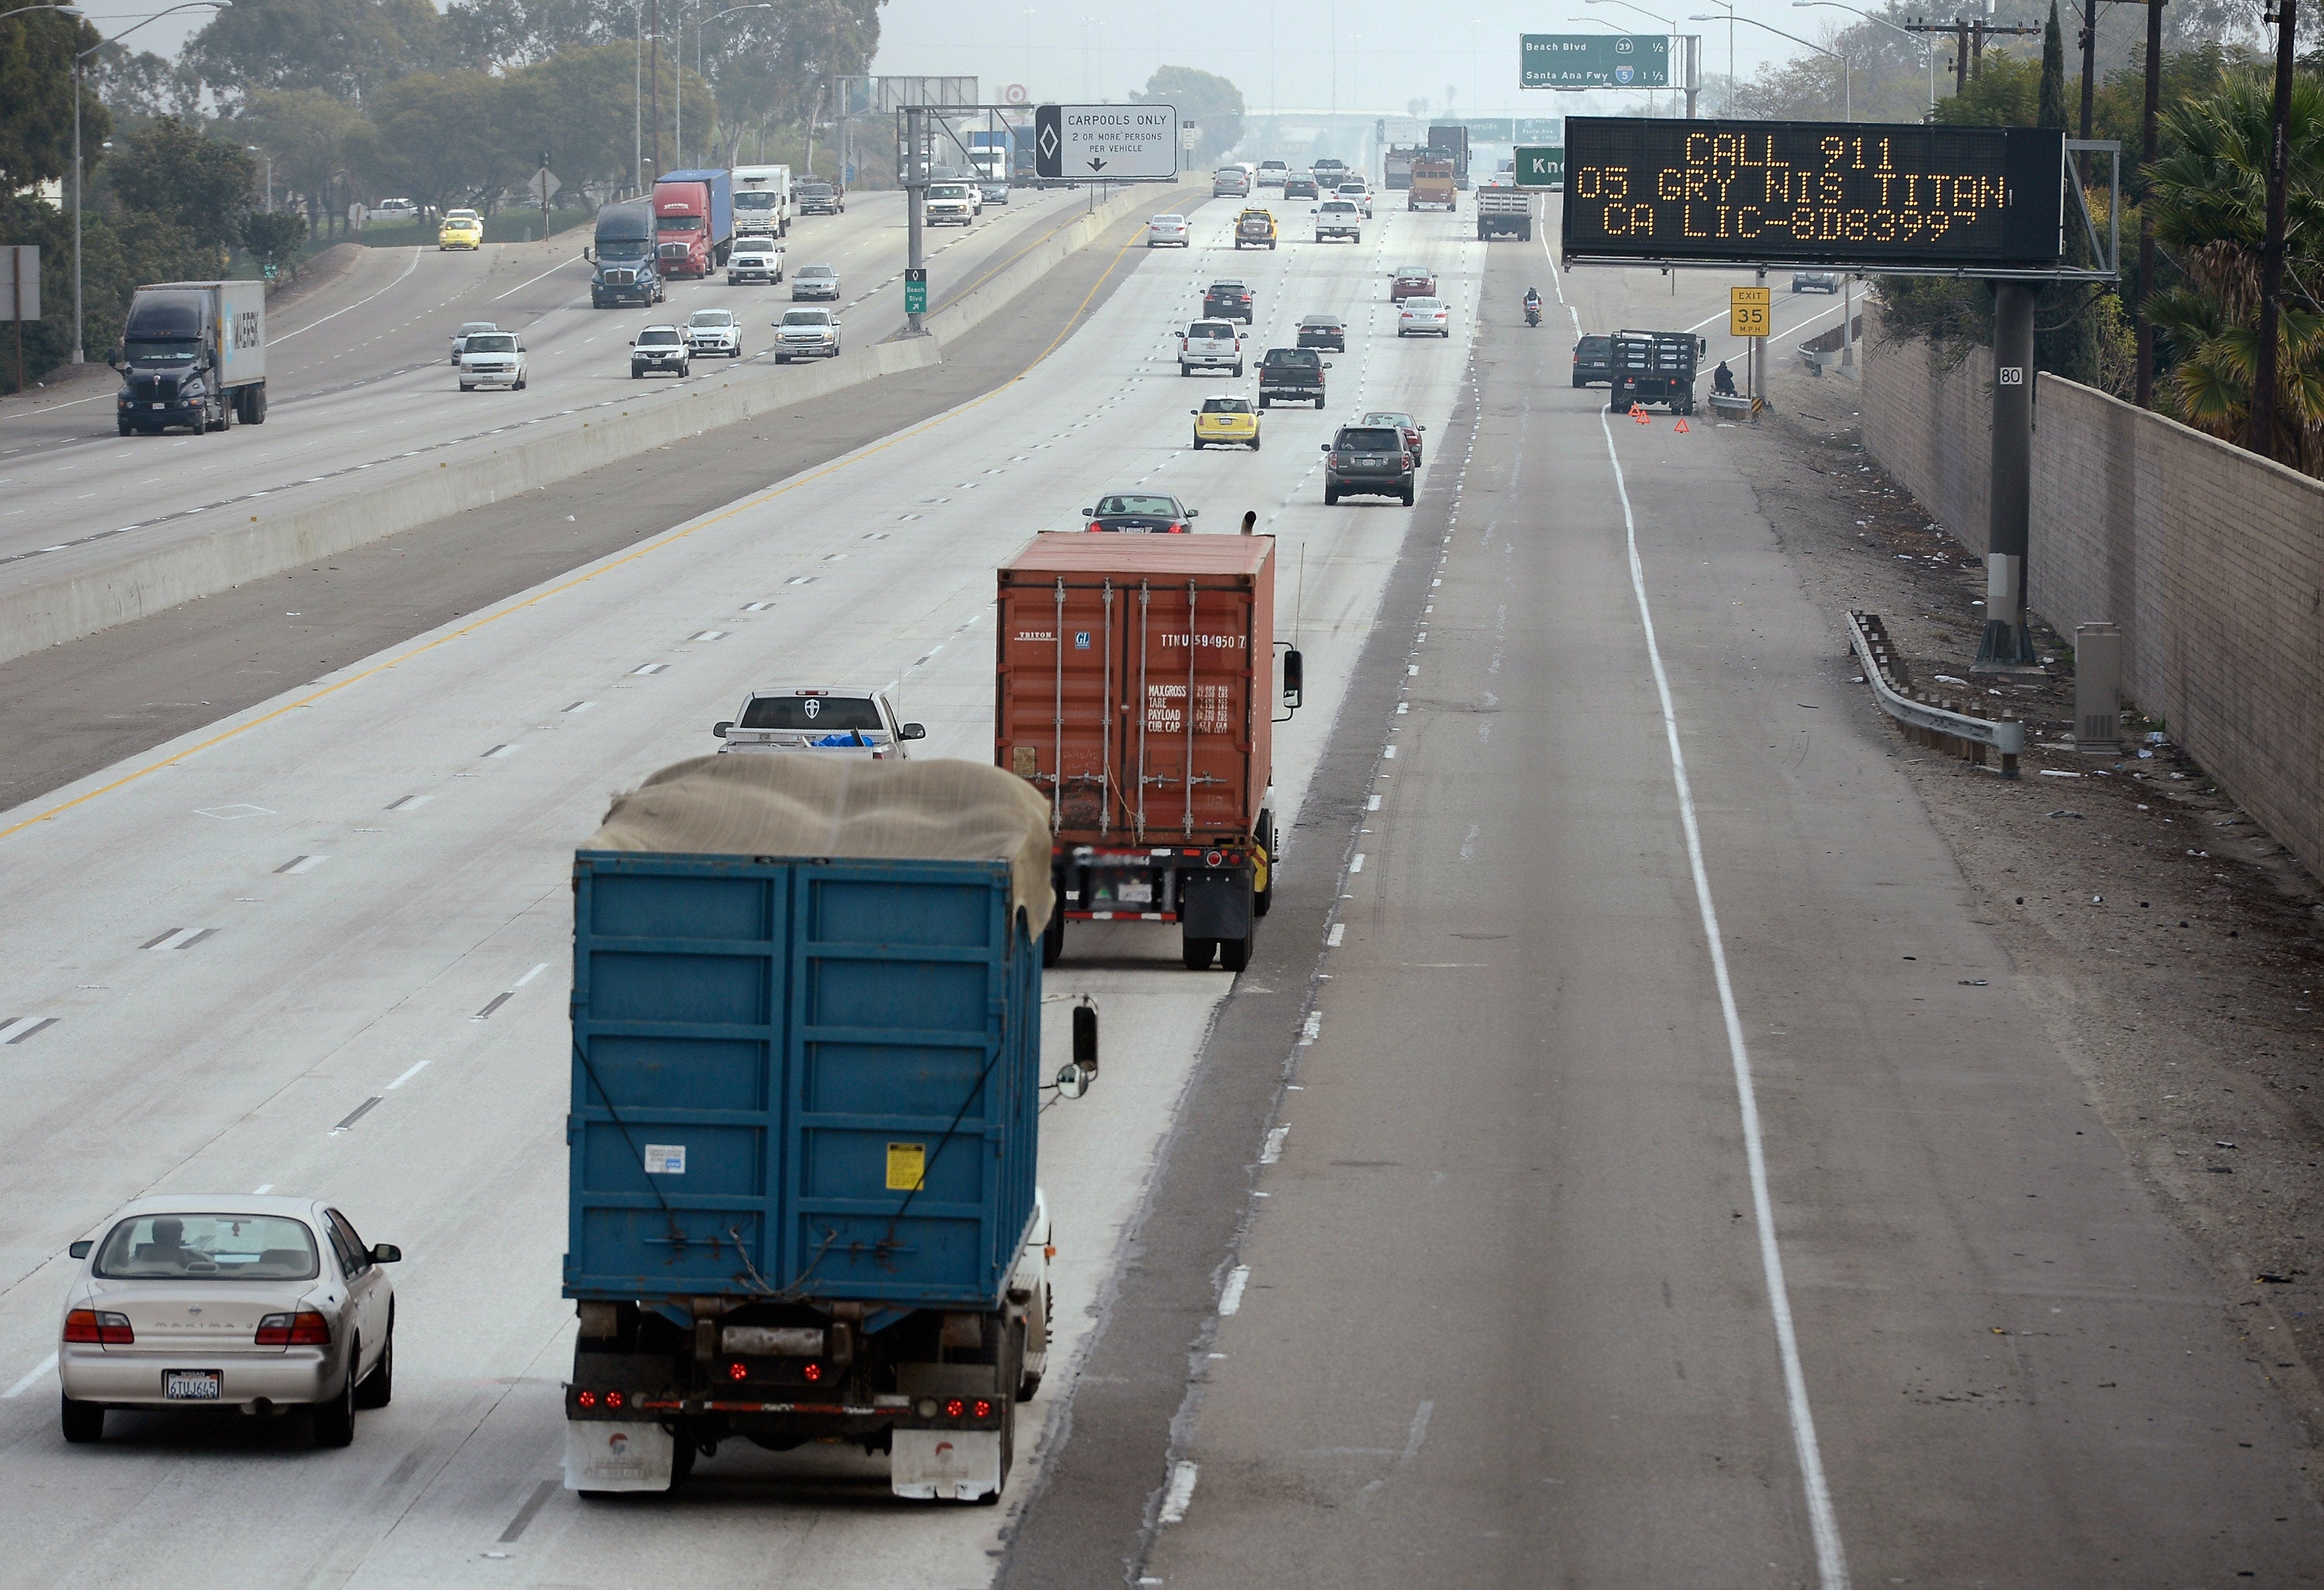 Dozens of drivers report being fired upon when driving down the 91 Freeway in California